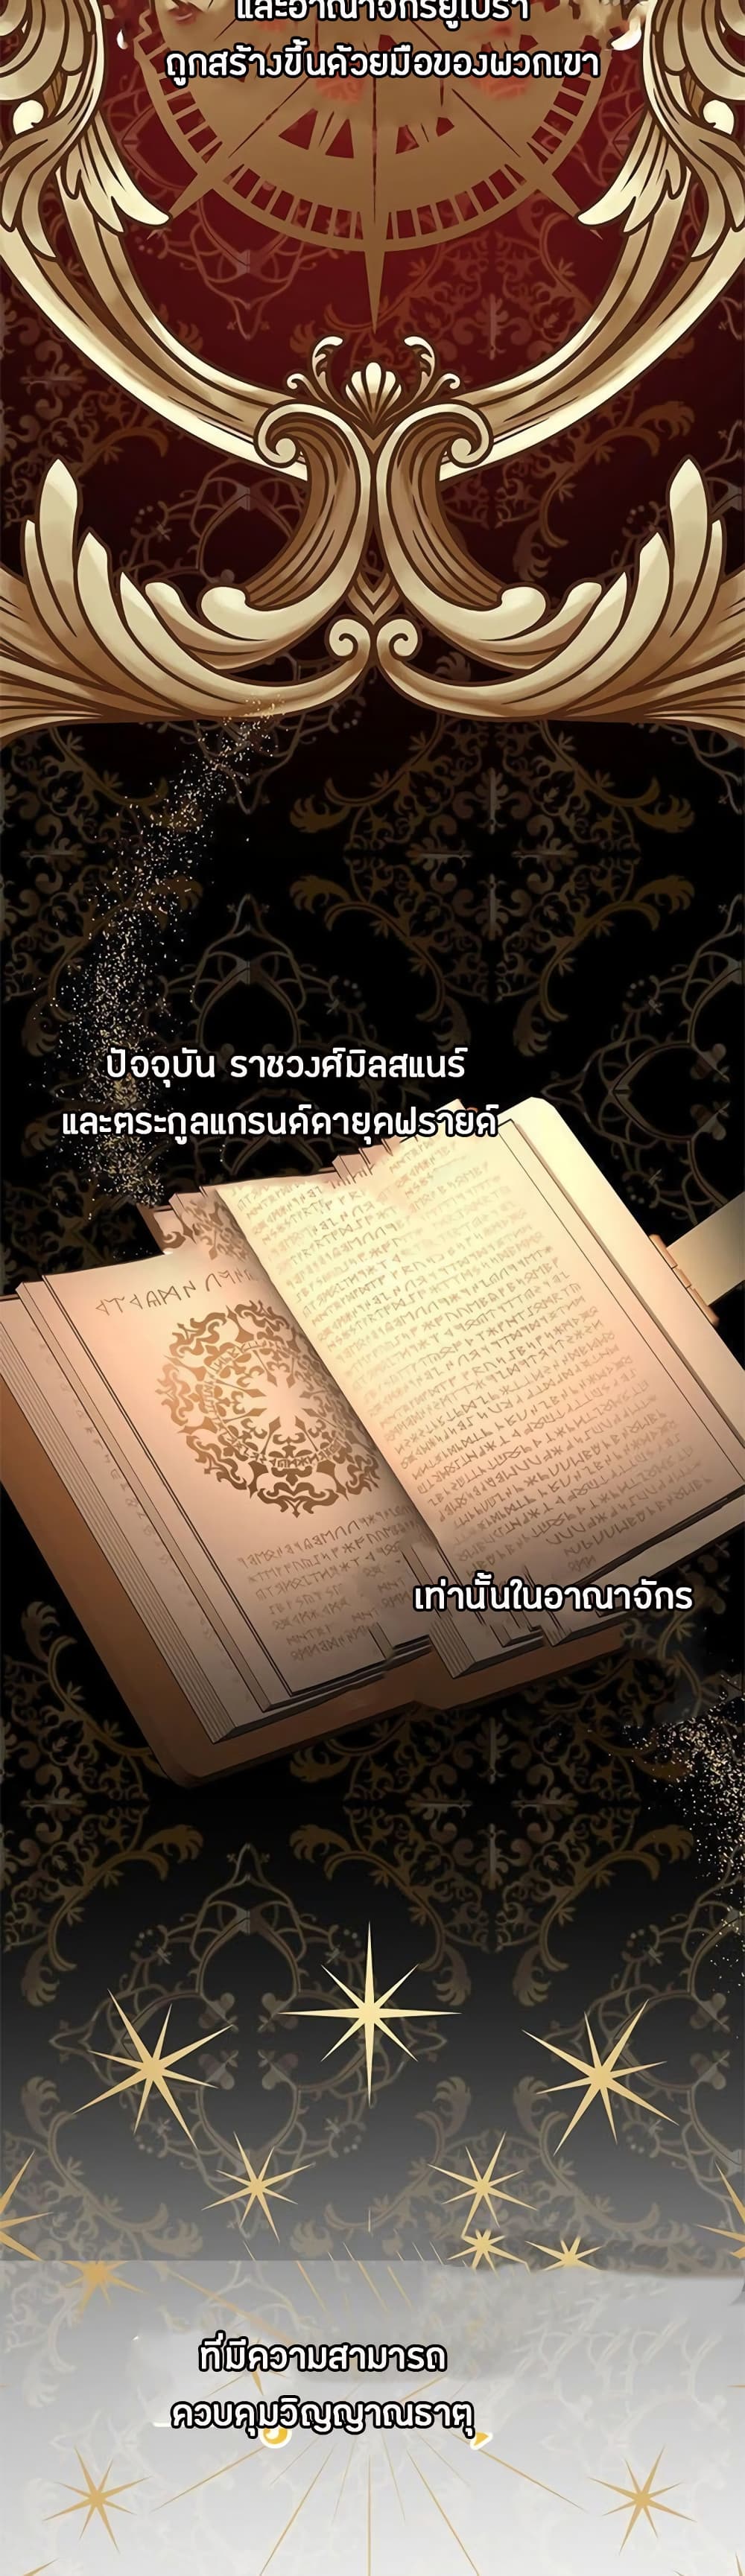 The Tyrant Wants To Live Honestly ตอนที่ 1 (3)